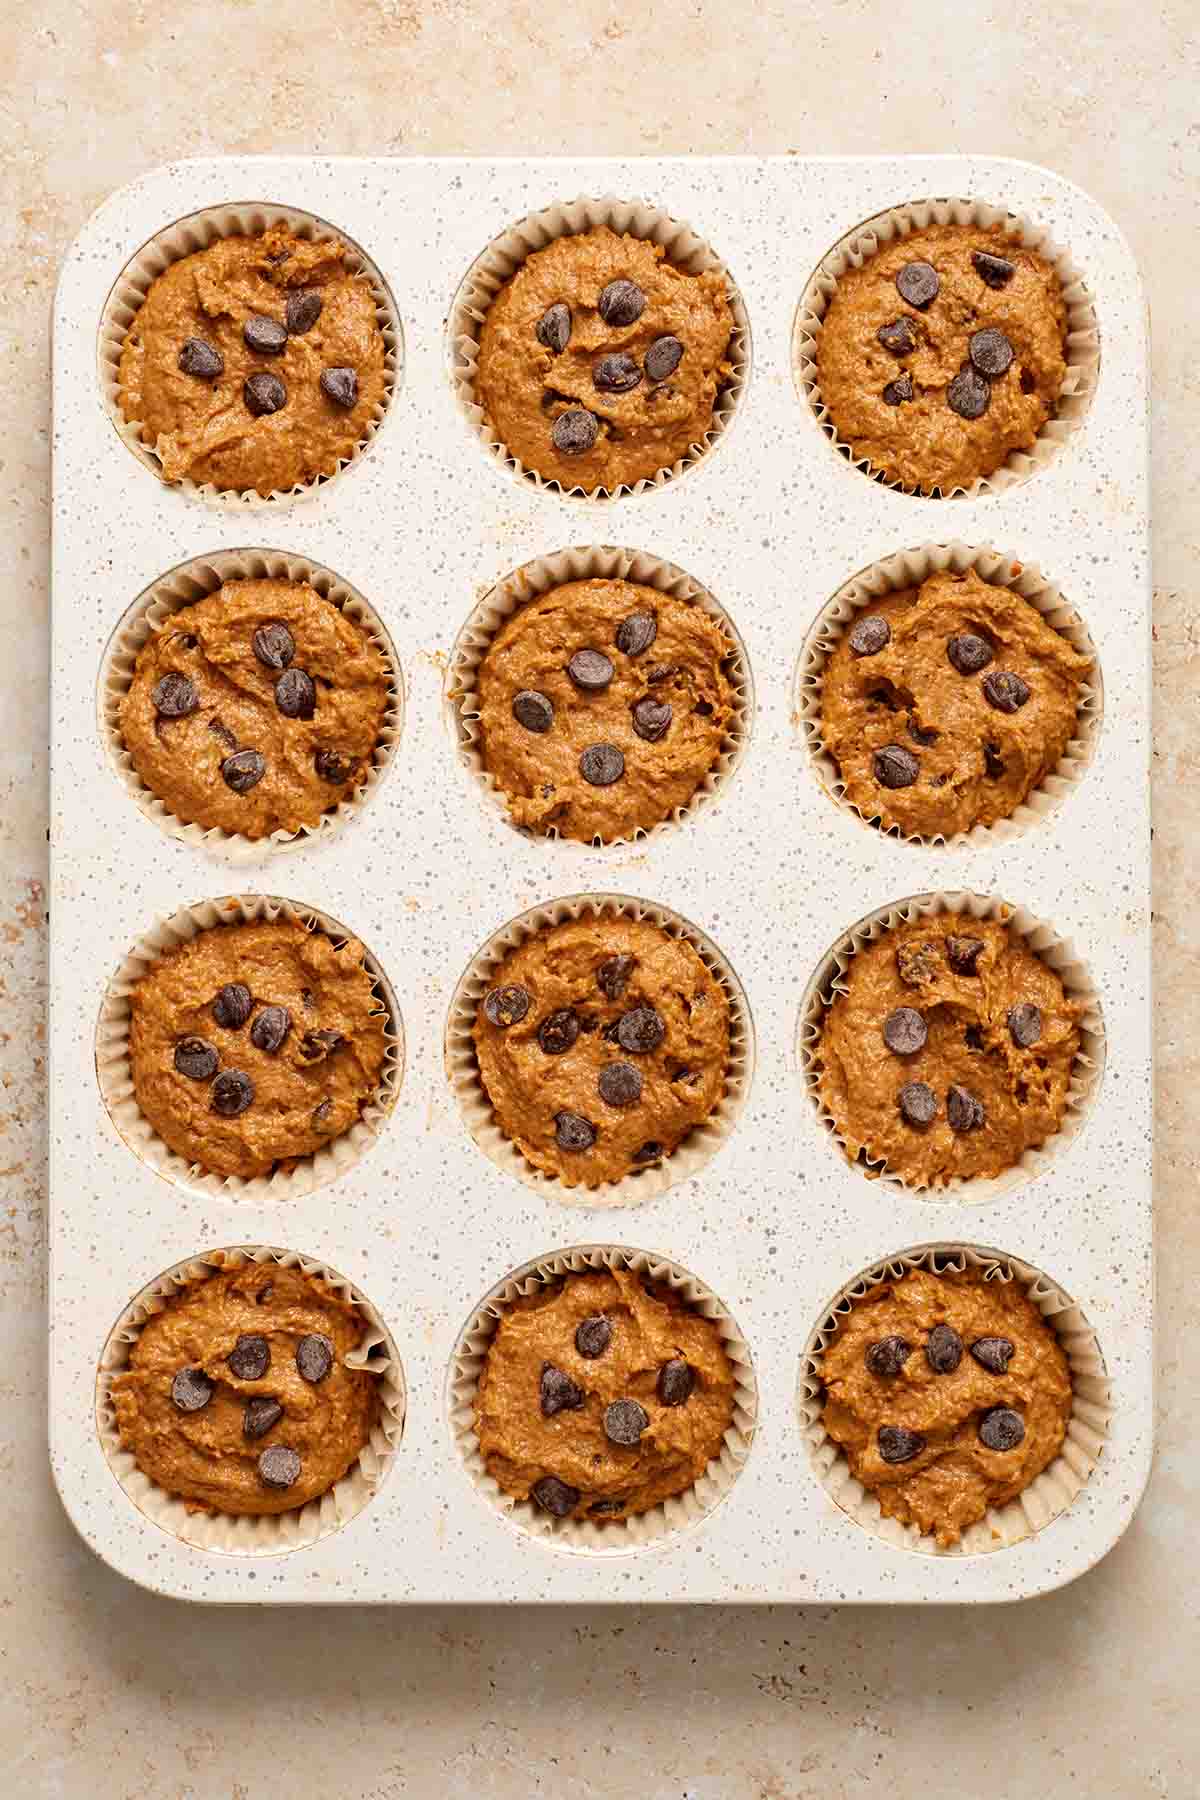 Muffin batter divided into a 12-cup muffin tin.